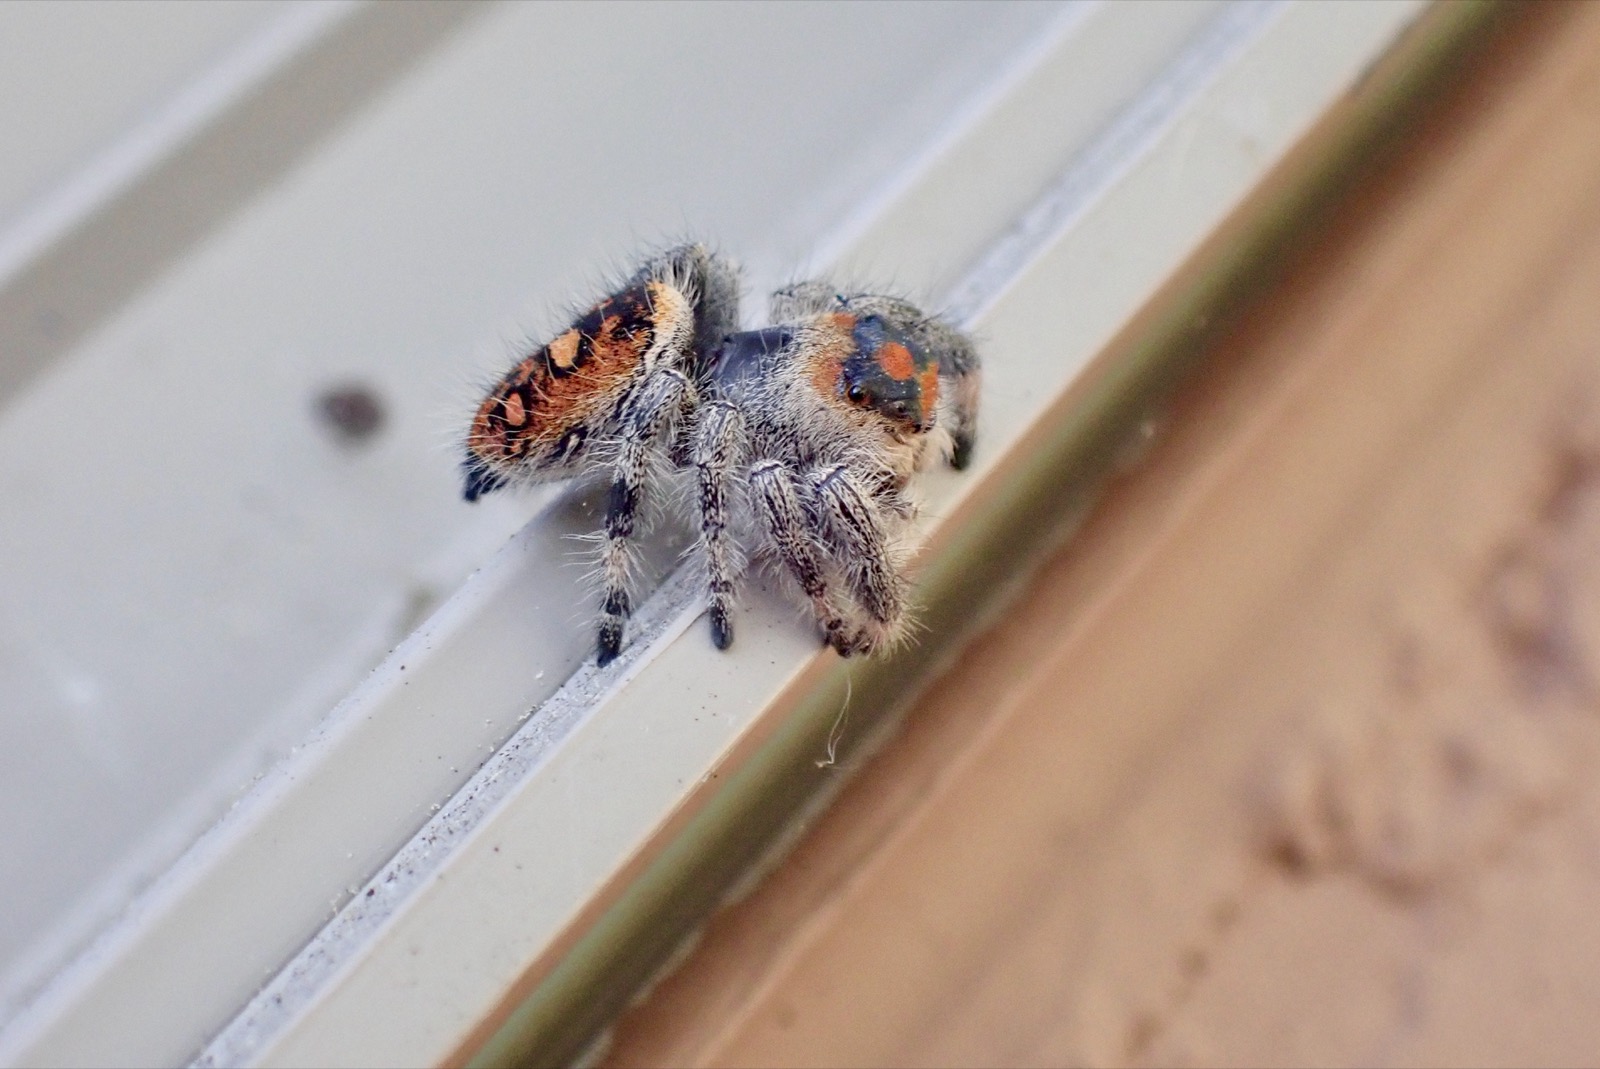 Photo of a regal jumping spider on a window frame. Right profile, orange and black, right four legs visible, multiple eyes